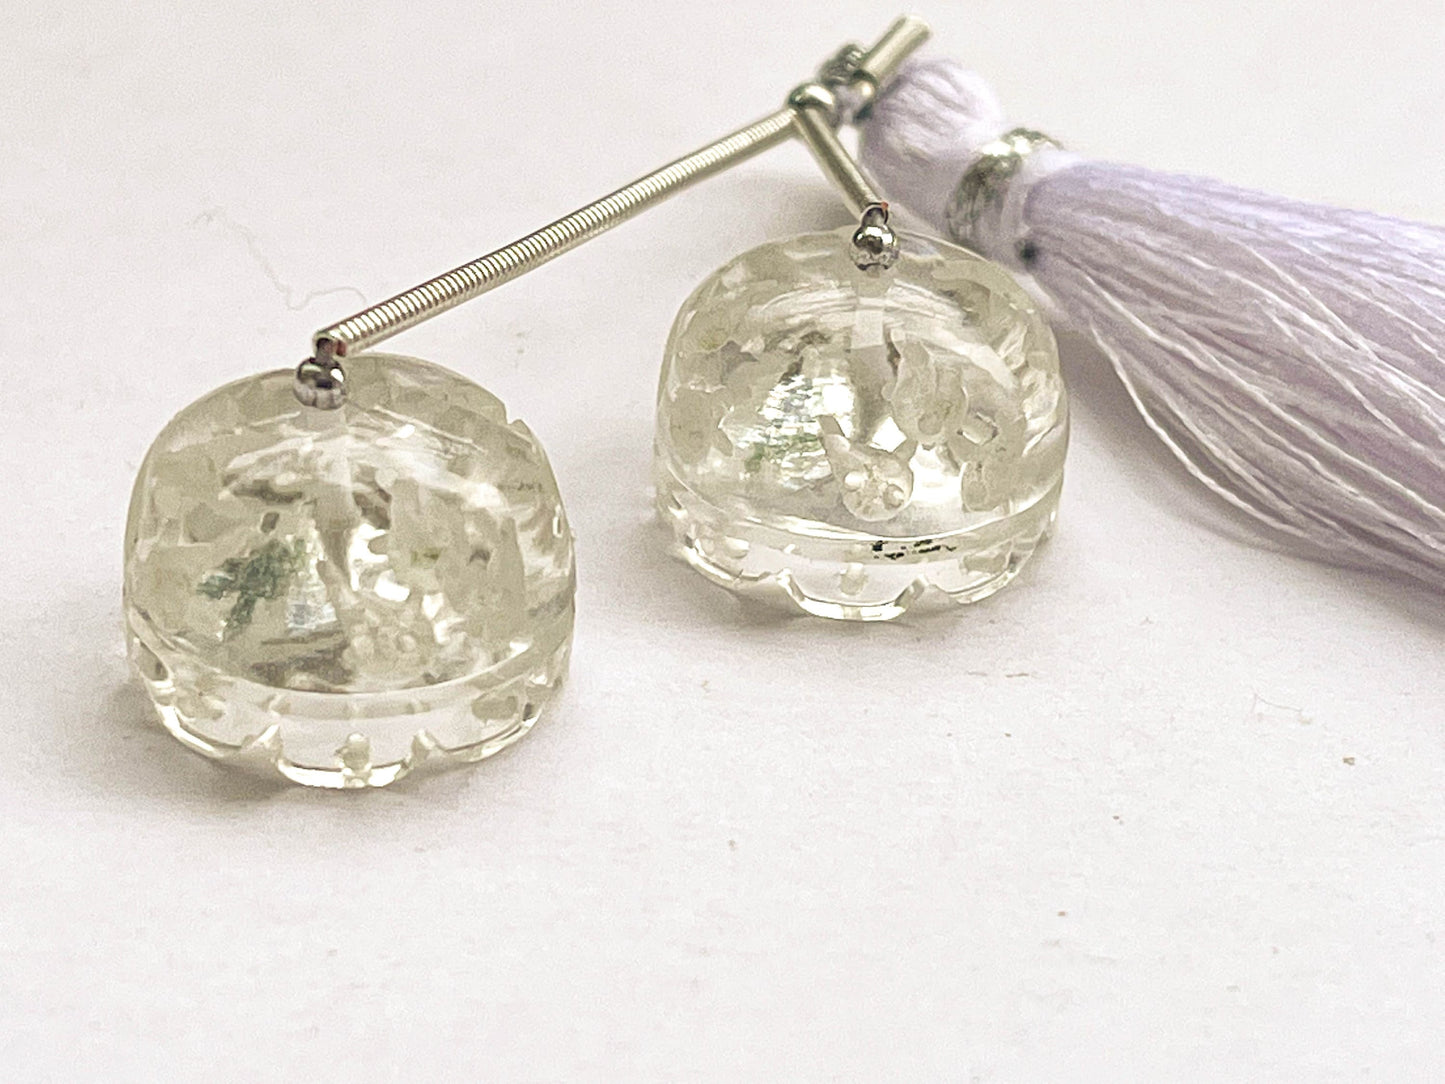 Crystal Carving Bell Shape Pair, Beautiful! Carving Work in Natural Crystal Gemstone for Earring's, 10x16MM, 2 Pieces